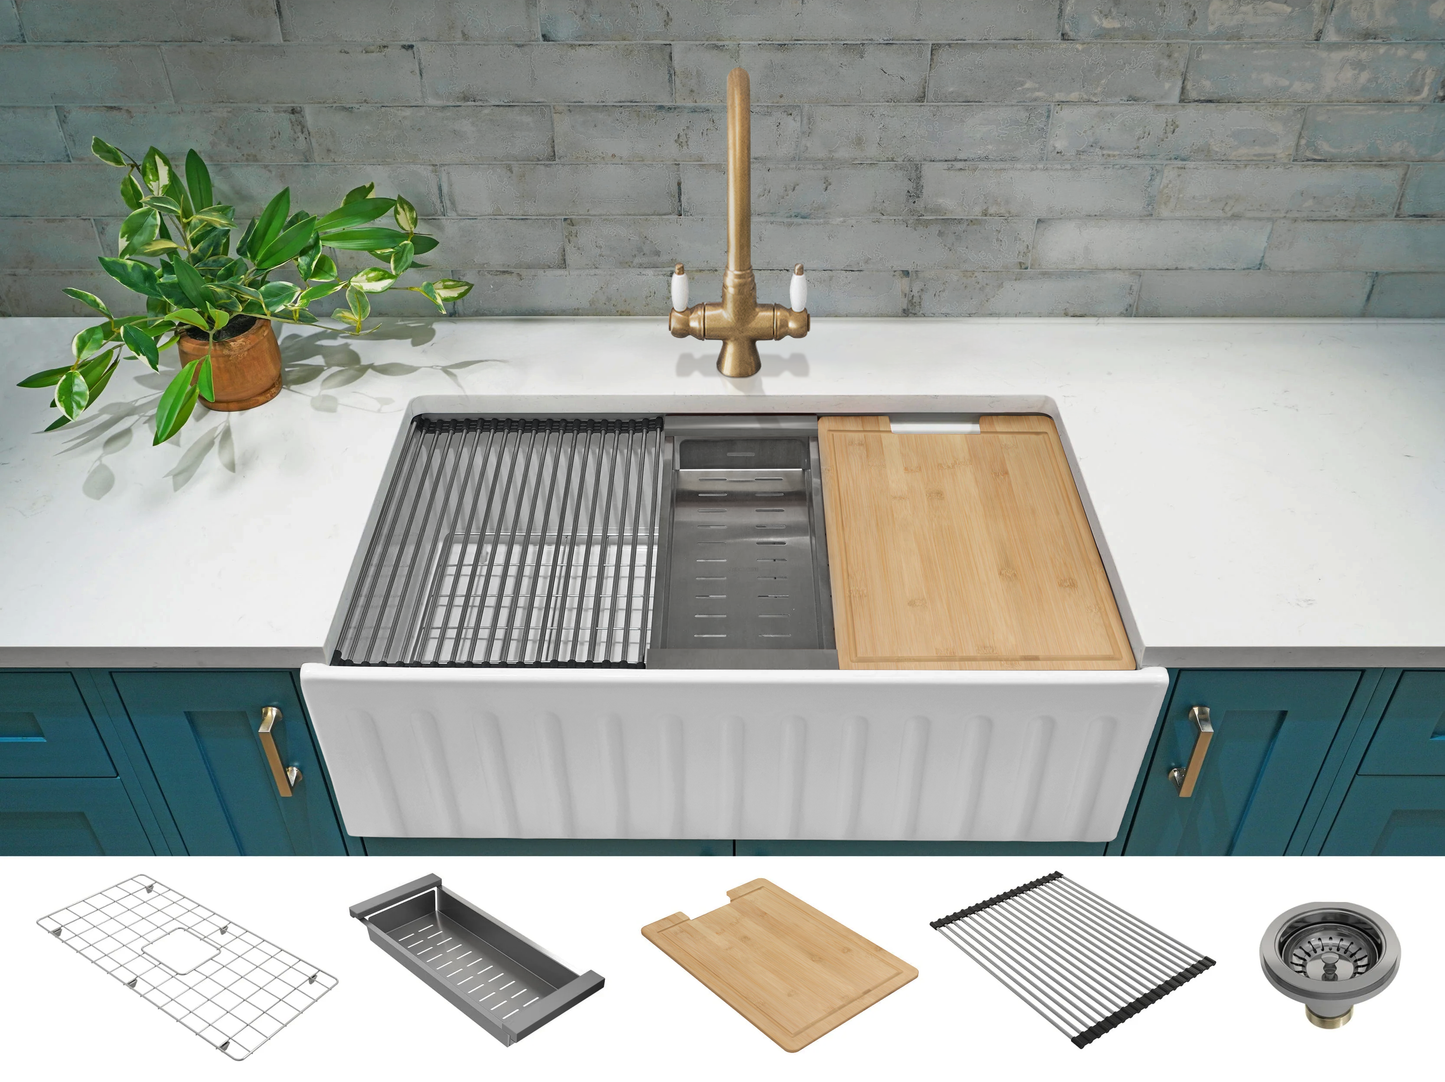 February Special - Fluted Farmhouse Sink With Chopping Board, Grate, Waste, Strainer & Cullender - 833 mm